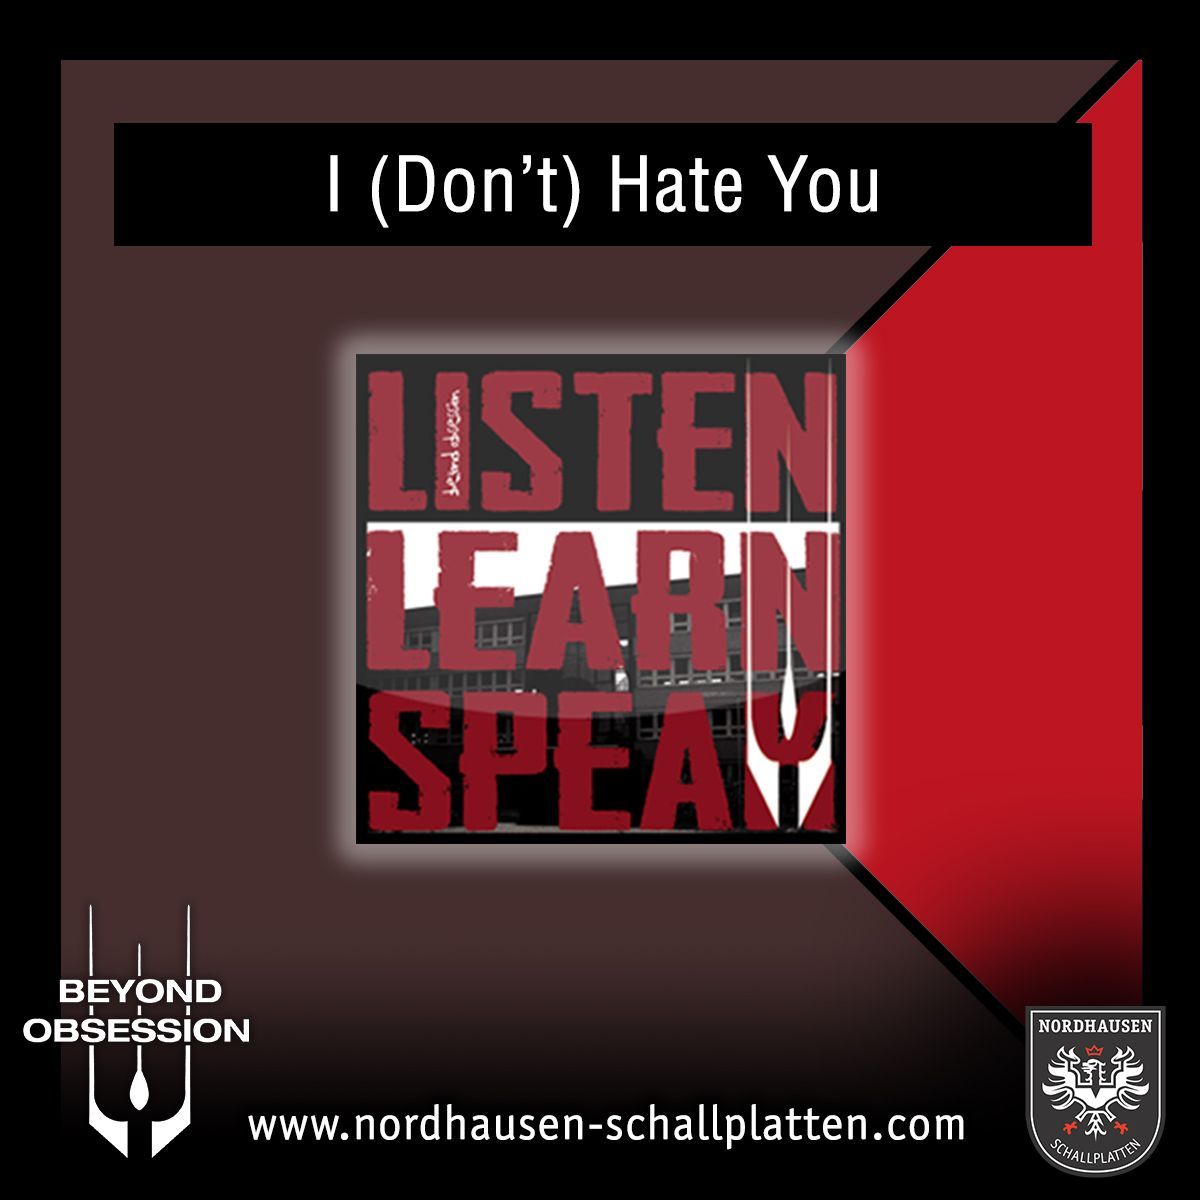 Listen to I (Don’t) Hate You by Beyond Obsession on #Youtube and never forget to be yourself: buff.ly/3CmGlBj #NordhausenSchallplatten #beyondobsession #listenlearnandspeak #momentsoftruth #pureandnaked #spreadthemusic